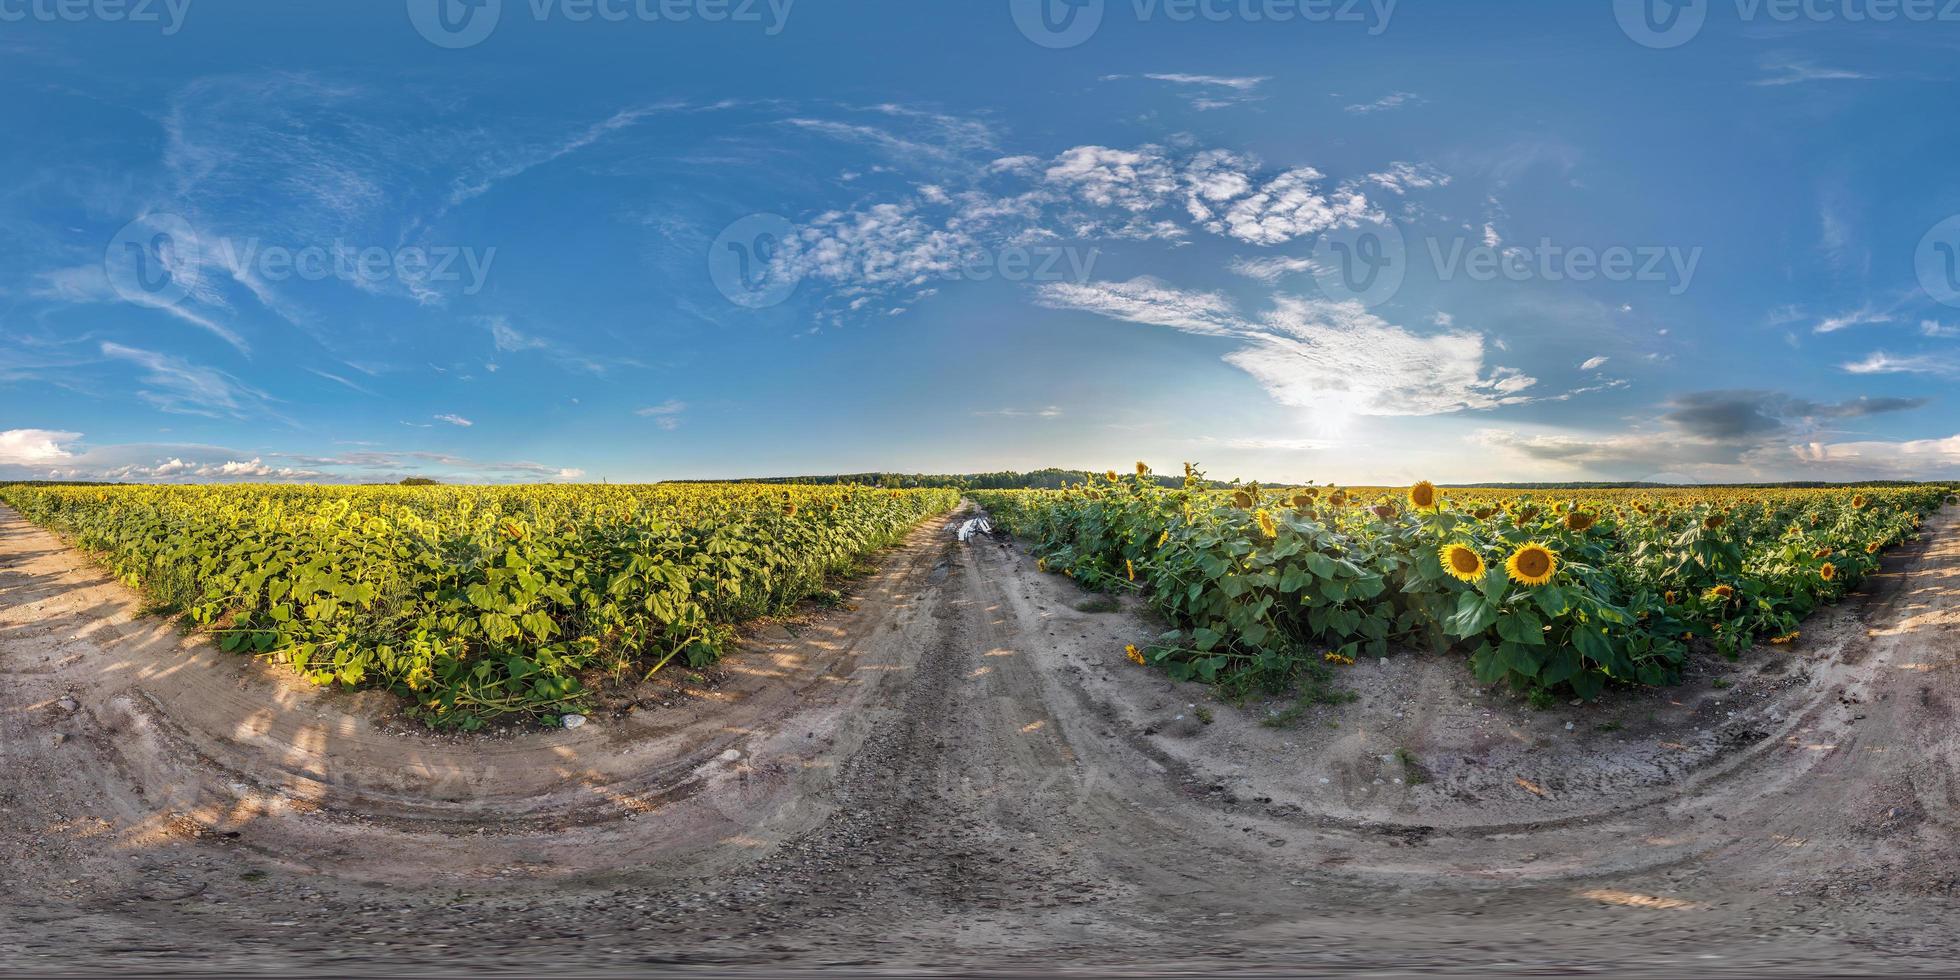 full seamless spherical panorama 360 by 180 degrees angle view on gravel road among sunflowers fields in sunny summer evening in equirectangular projection, skybox VR AR virtual reality content photo